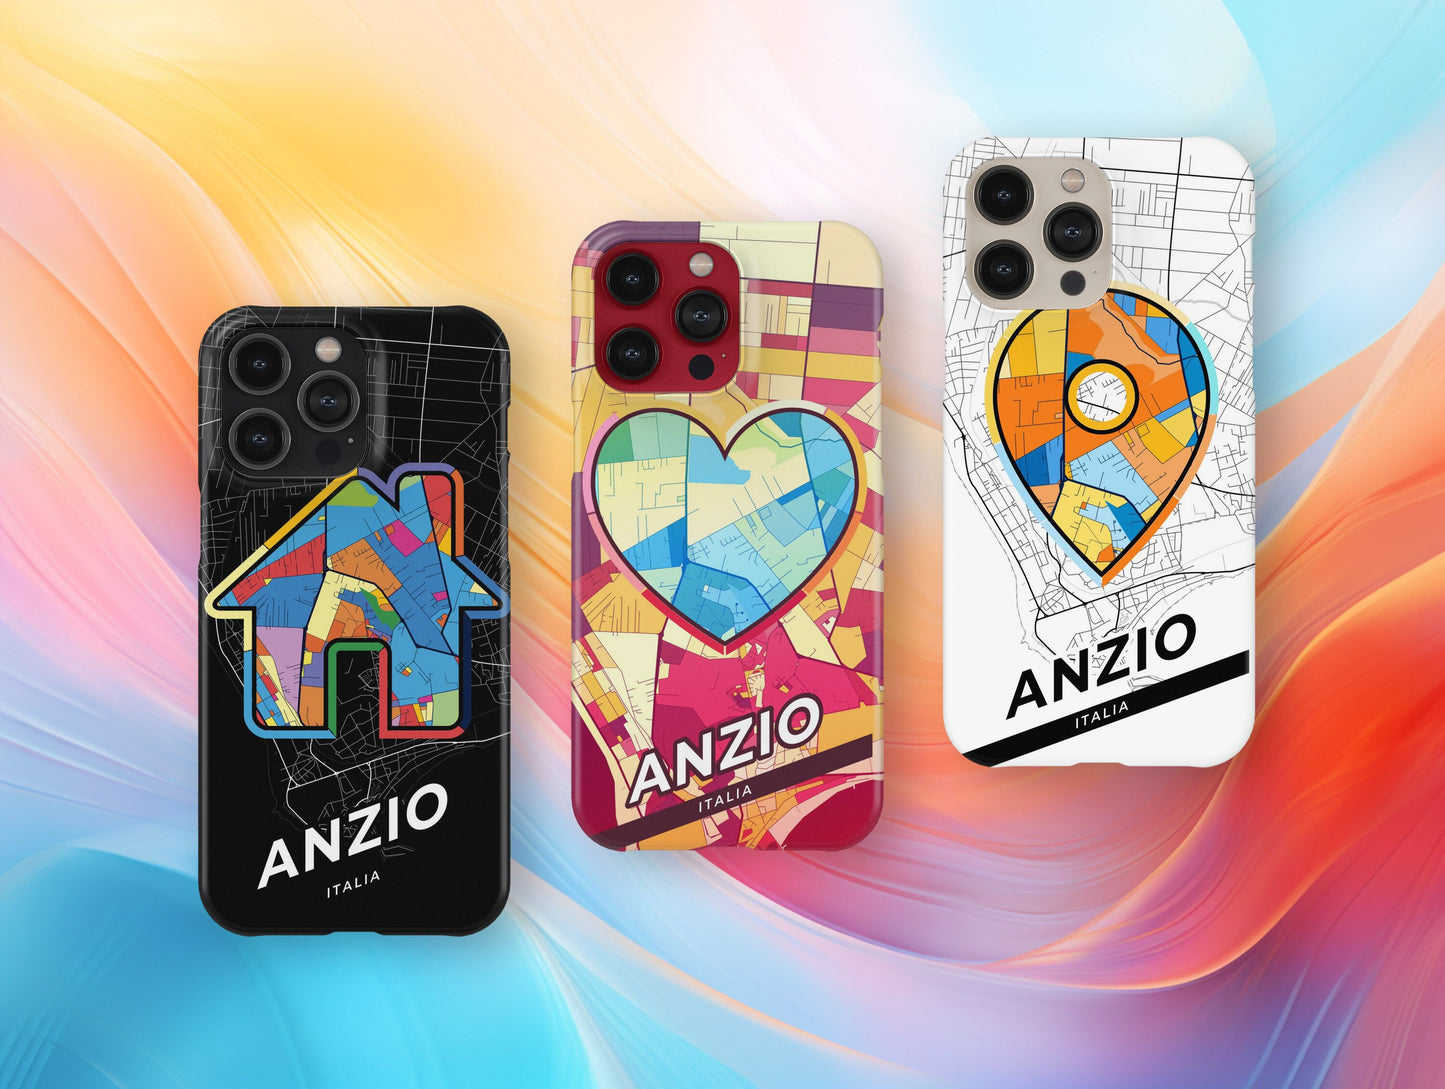 Anzio Italy slim phone case with colorful icon. Birthday, wedding or housewarming gift. Couple match cases.